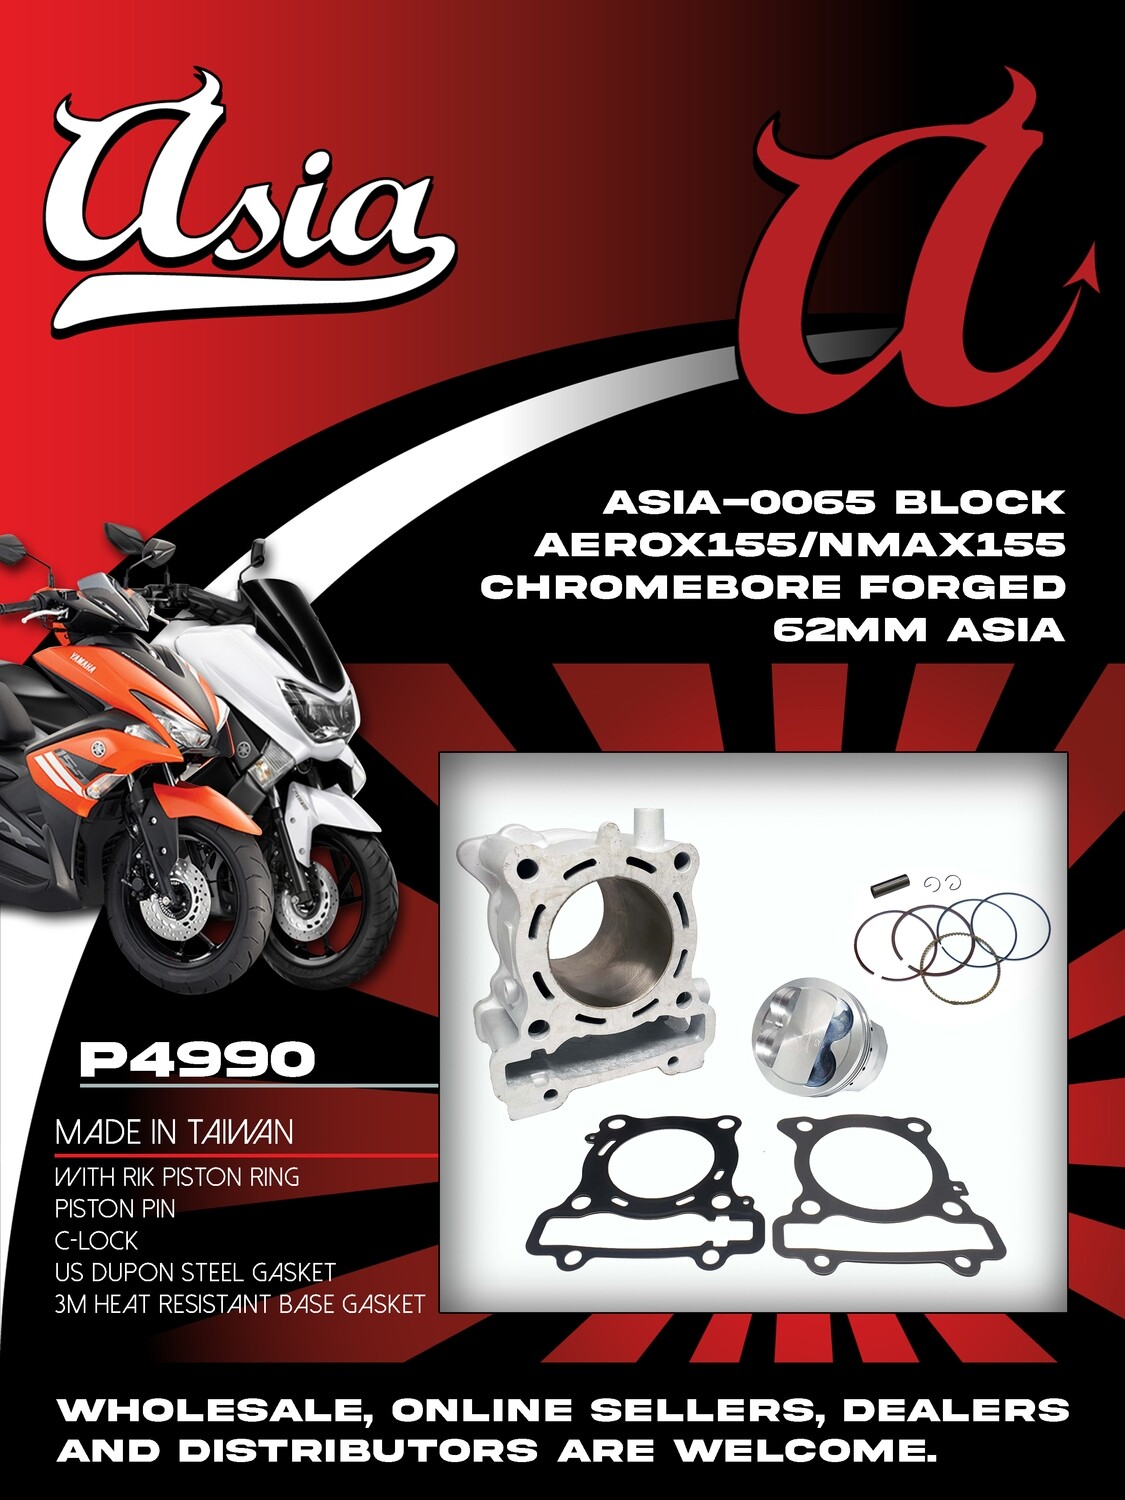 BLOCK NMAX155 CHROMEBORE FORGED 62MM ASIA